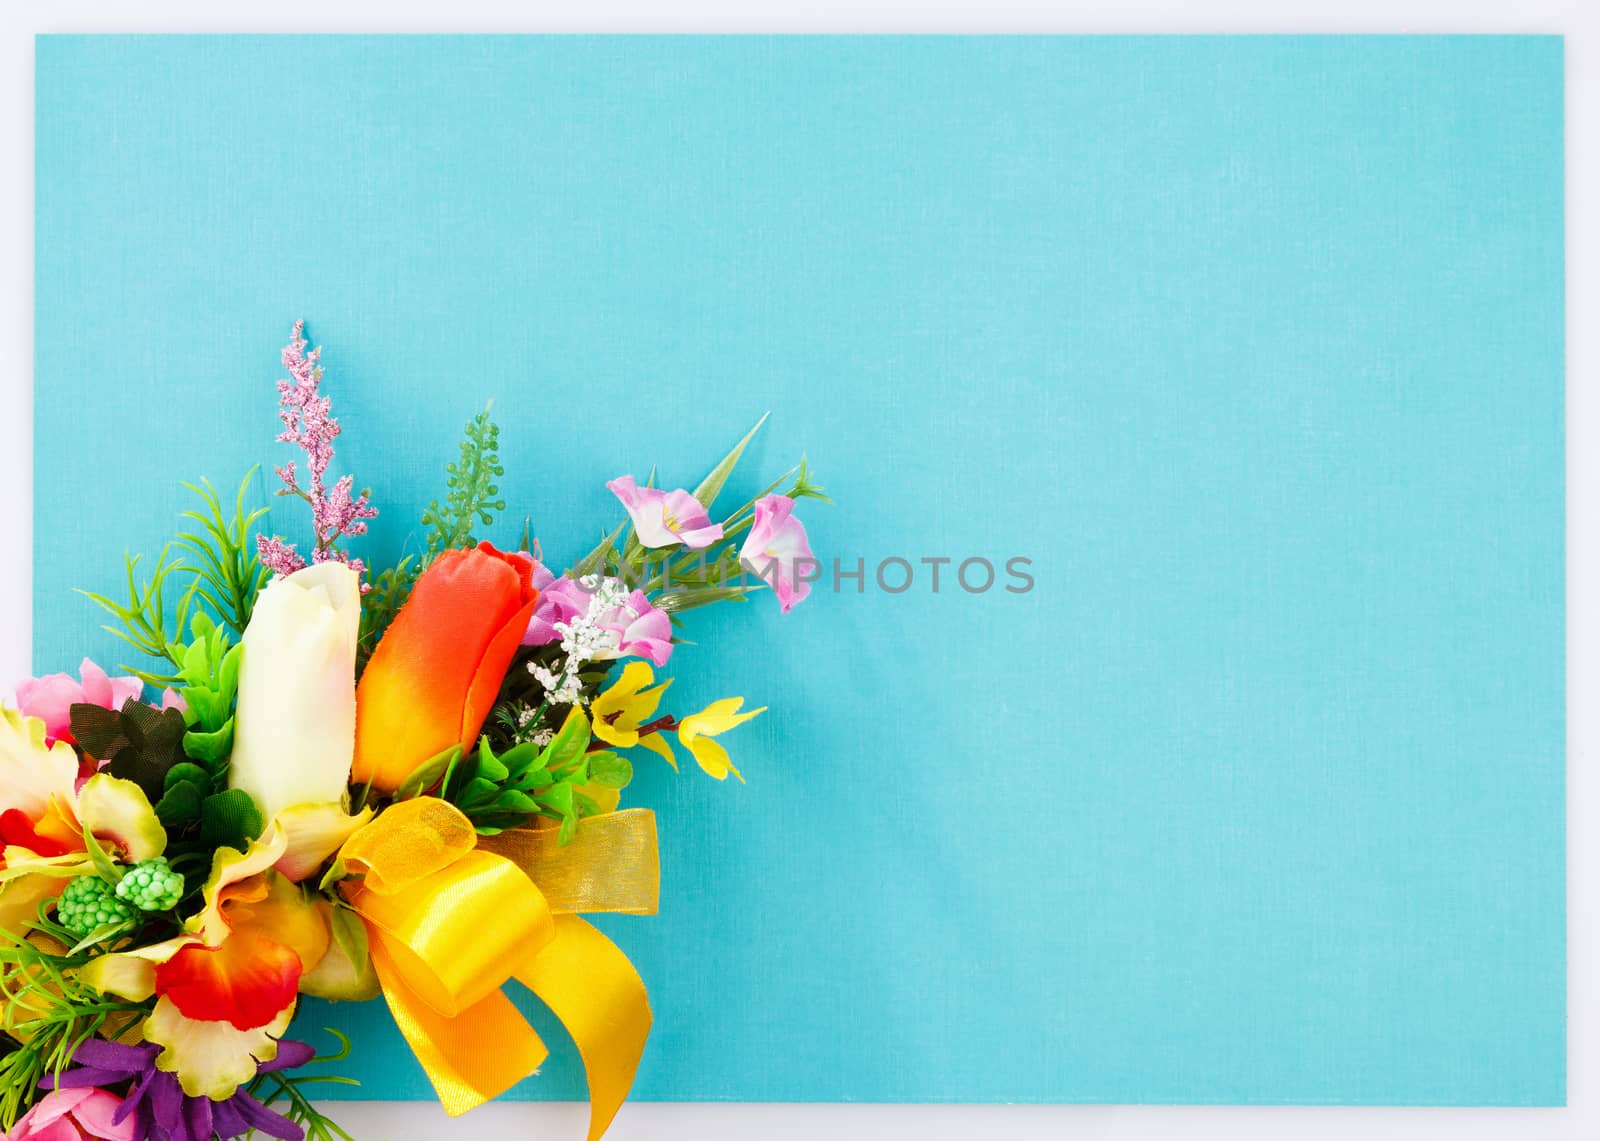 artificial flowers on blue background with place for label